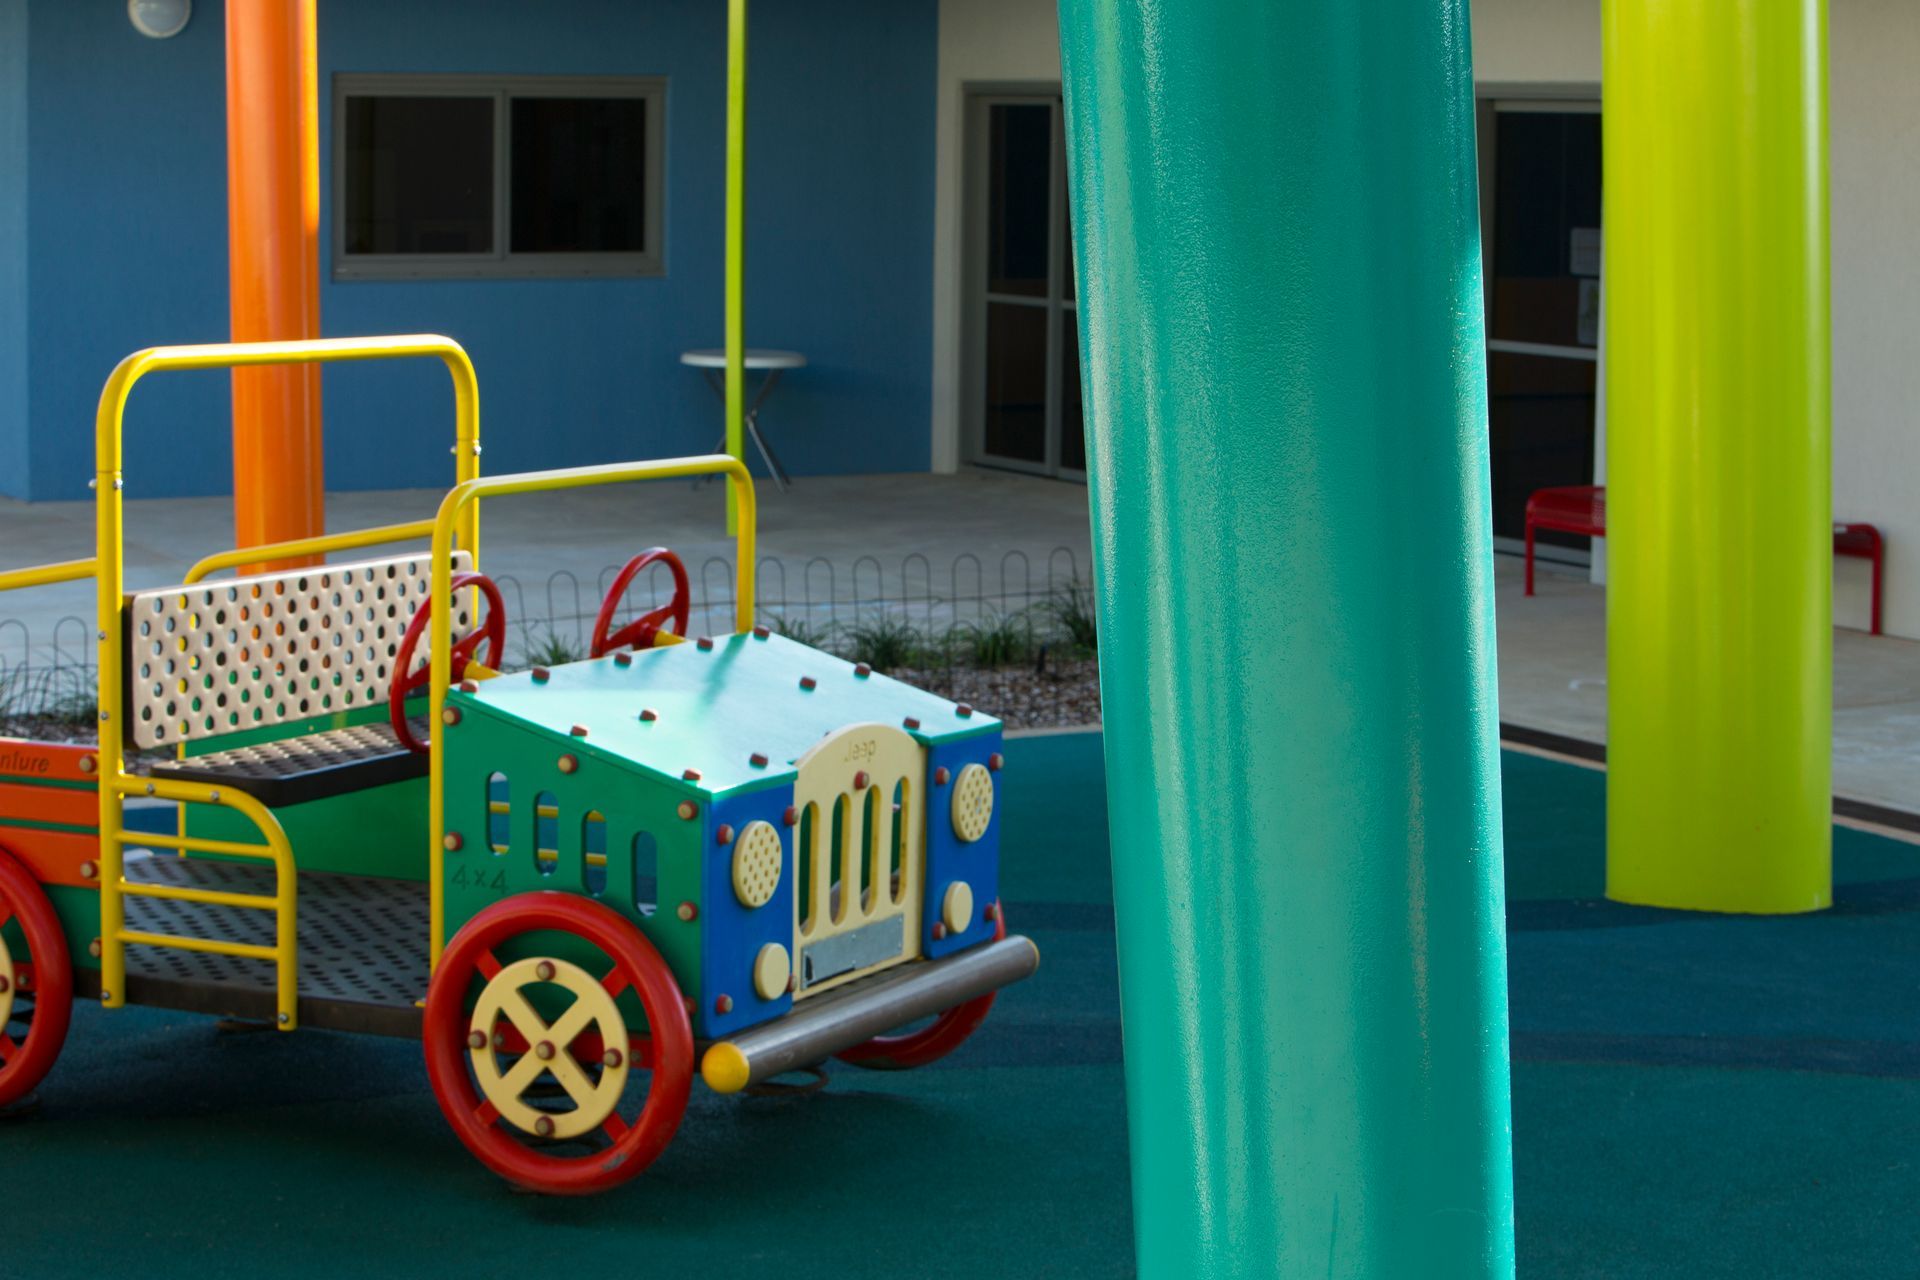 A colorful toy car is sitting in a playground